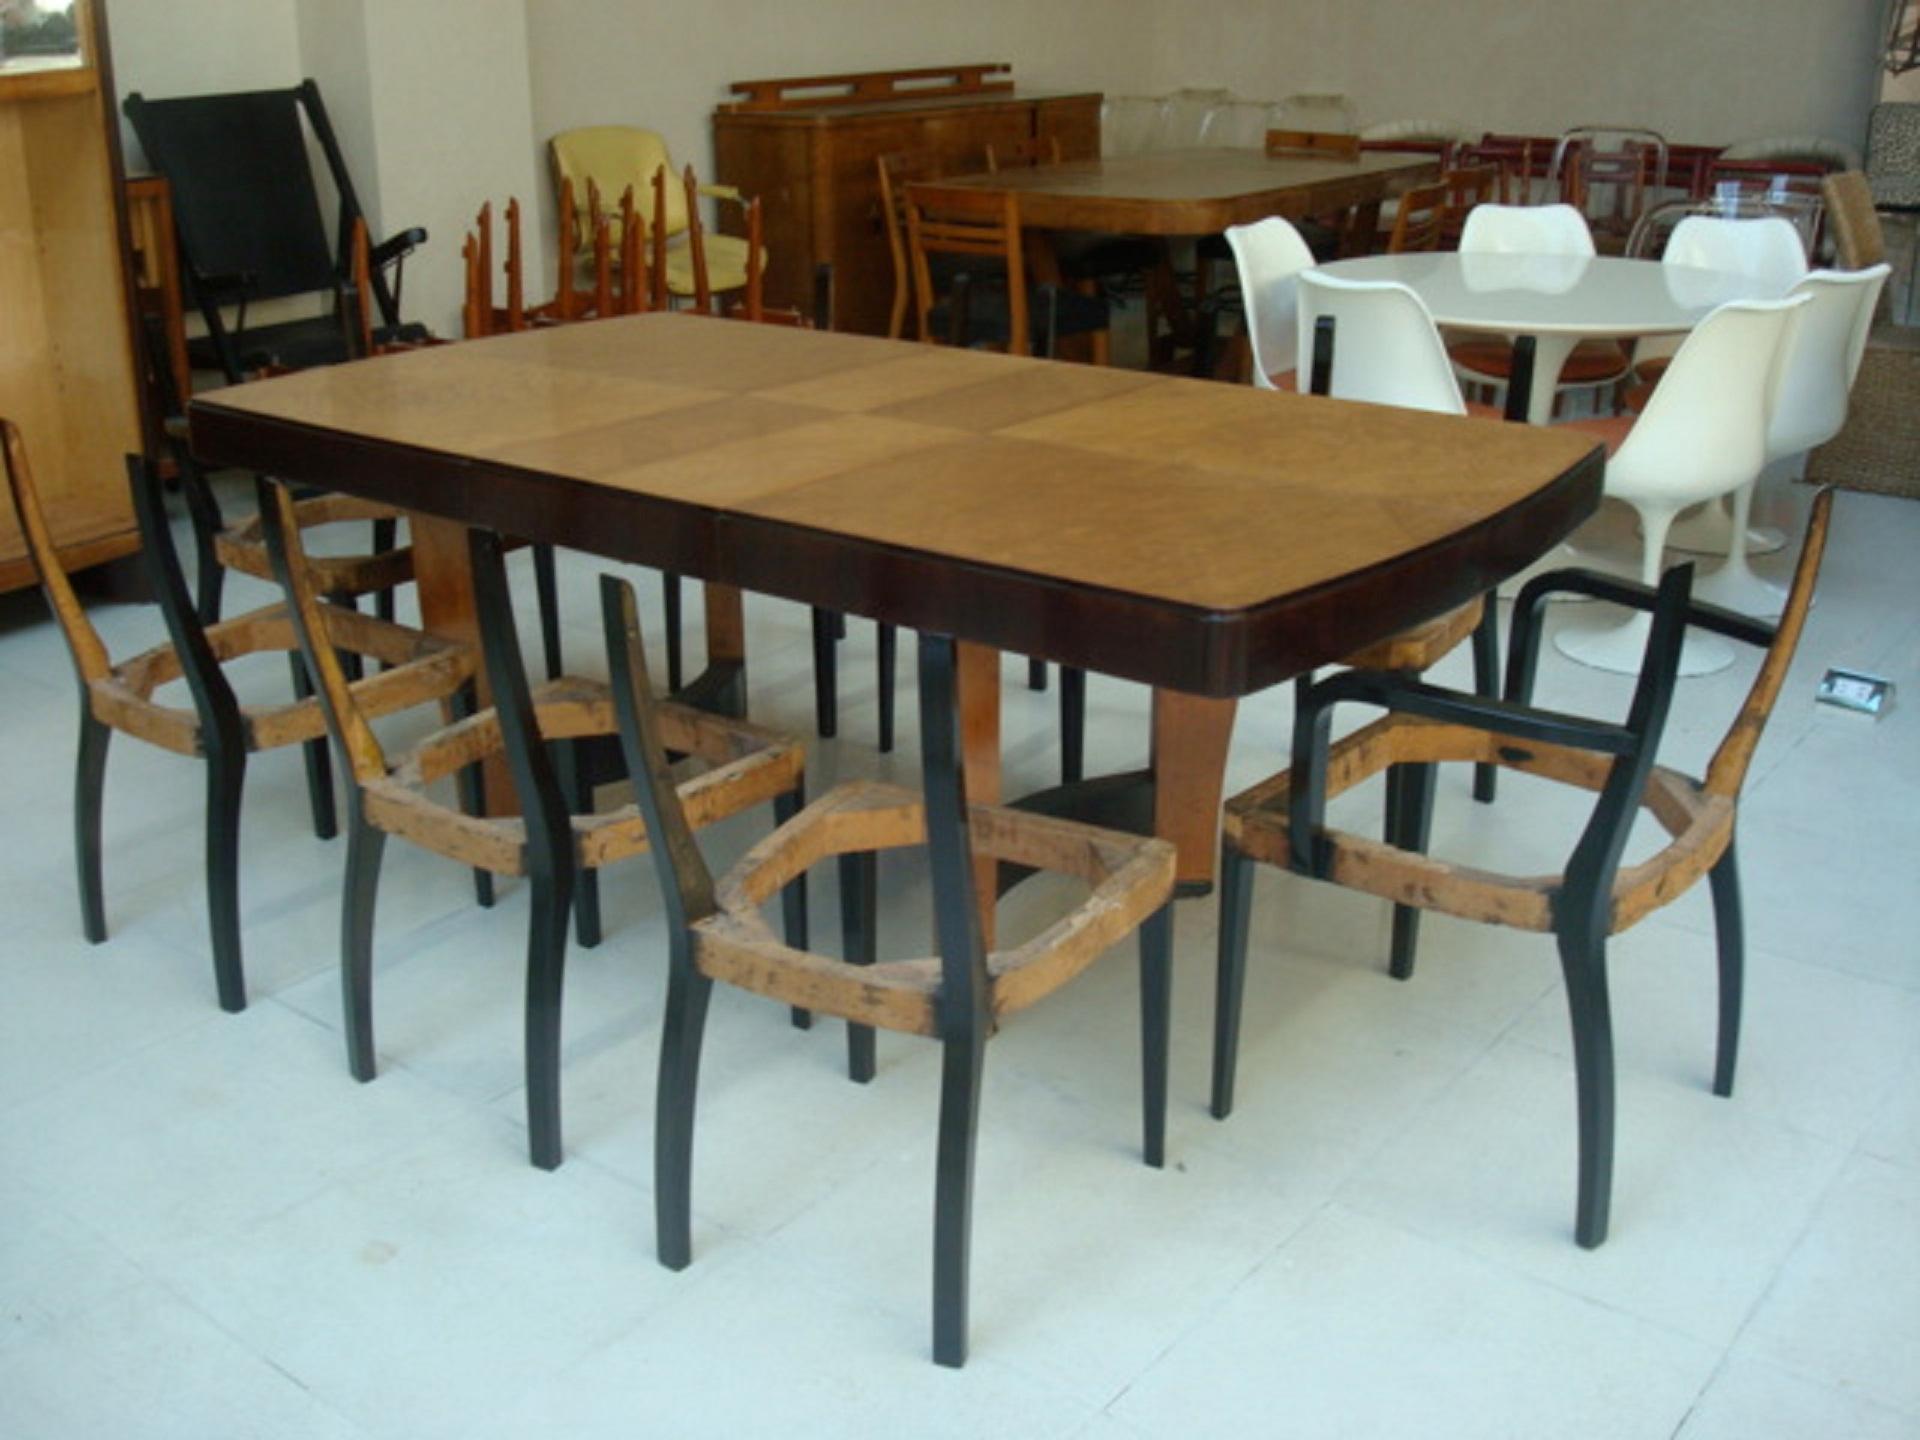 Dining table Art Deco
Year: 1930
Country: German
Wood and leather
It is an elegant and sophisticated dining table.
You want to live in the golden years, this is the dining table that your project needs.
We have specialized in the sale of Art Deco